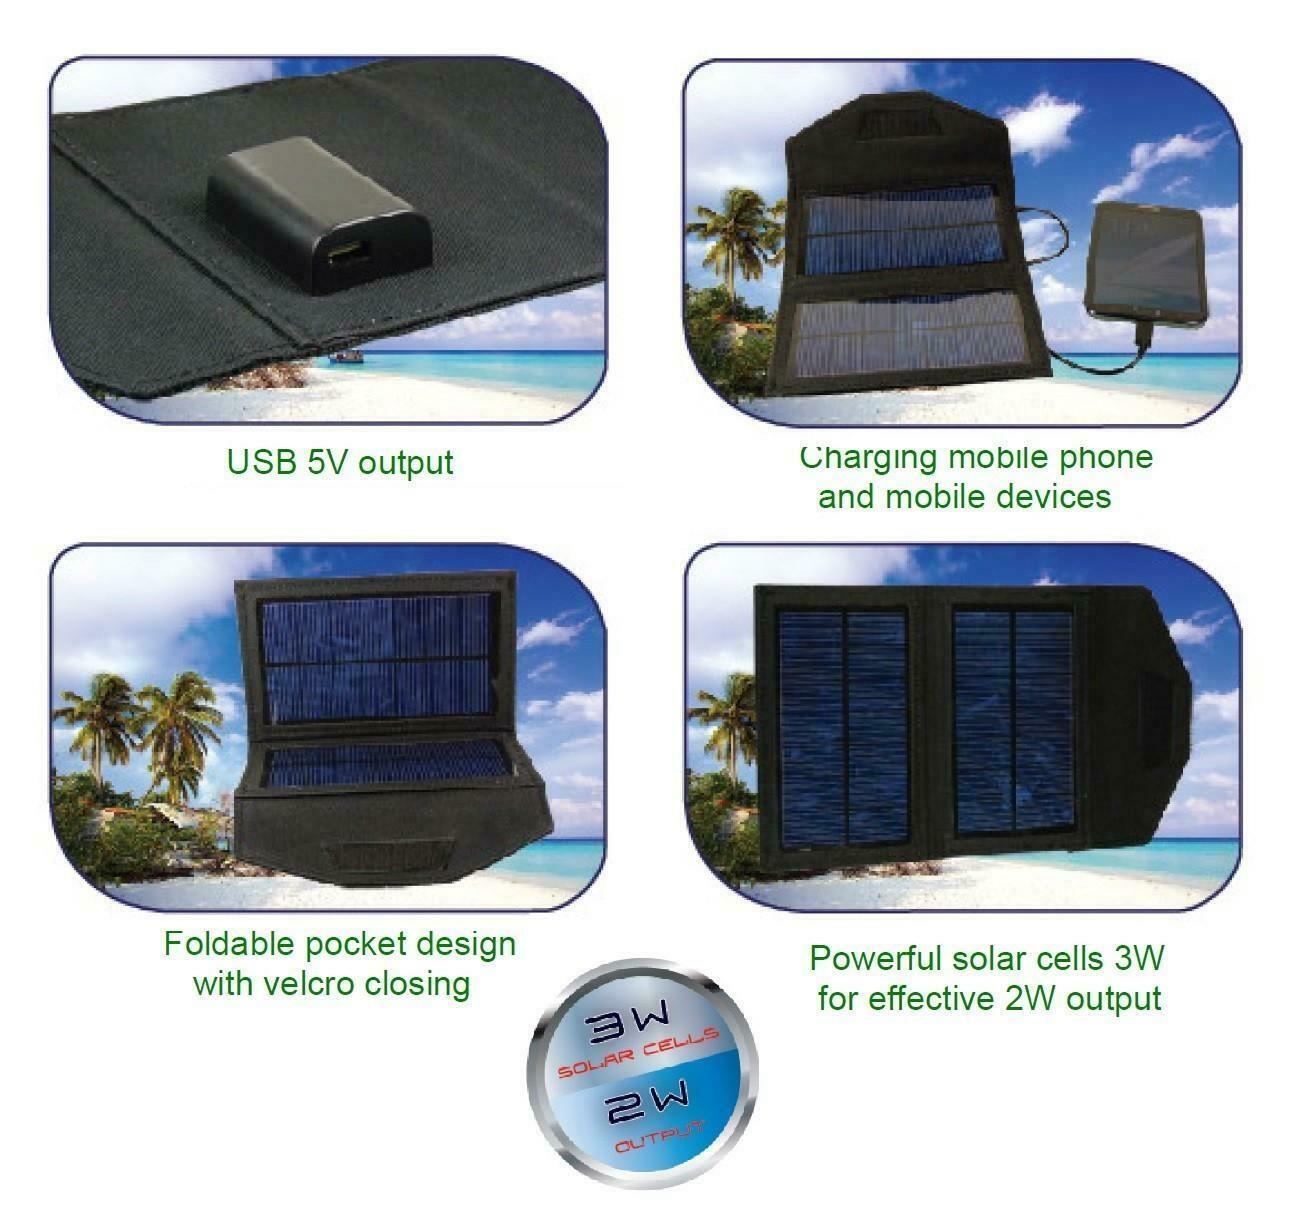 POWERplus Fox Pocket Size Solar Charger Features